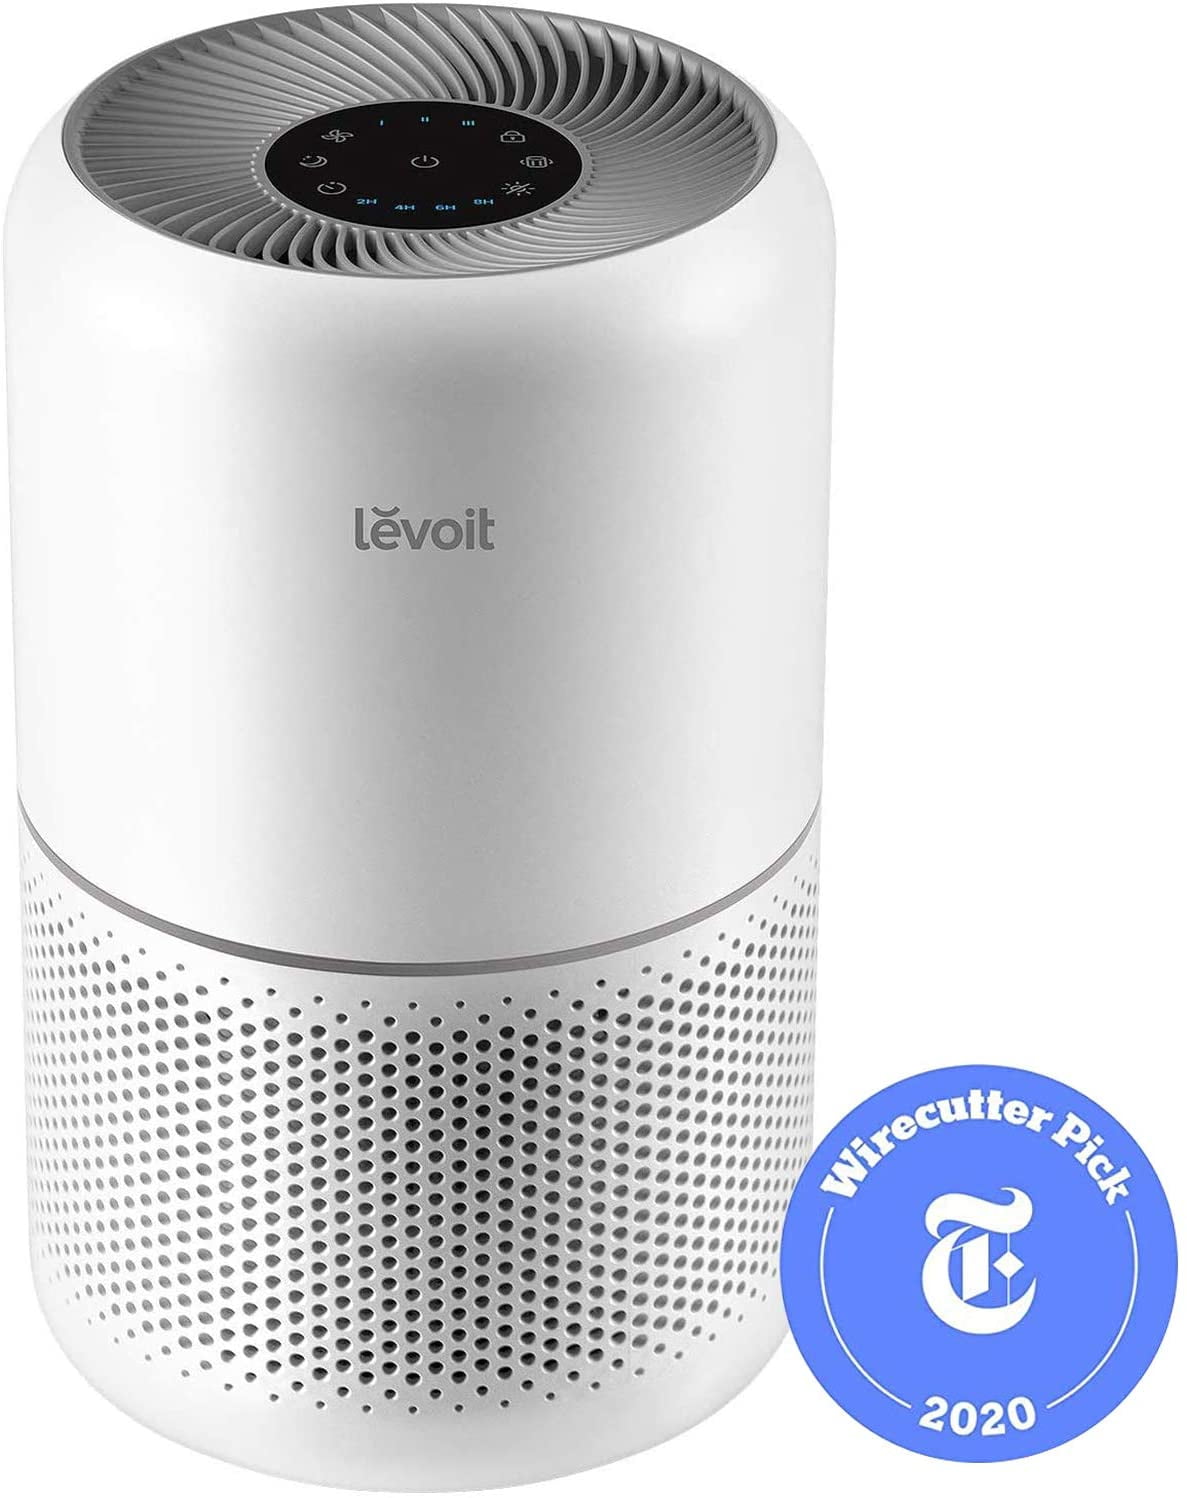 LEVOIT Air Purifier for Home Allergies Pets Hair Smokers in 